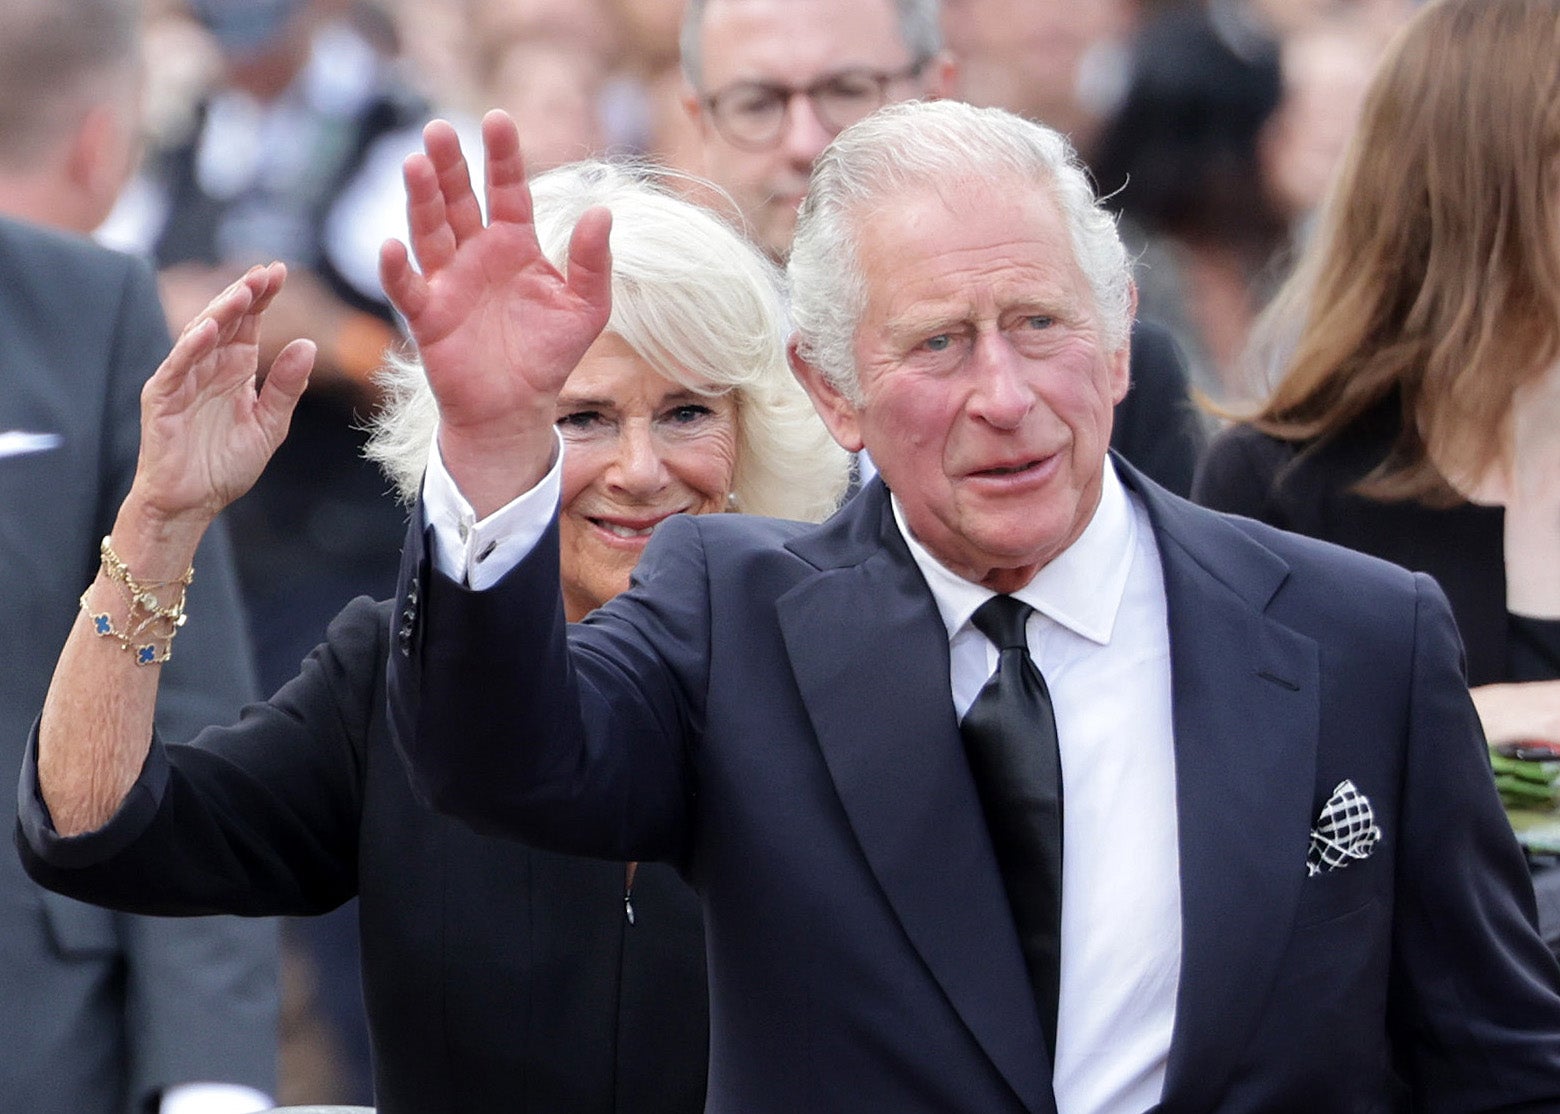 King Charles III and Camilla after viewing floral tributes outside Buckingham Palace earlier in the day